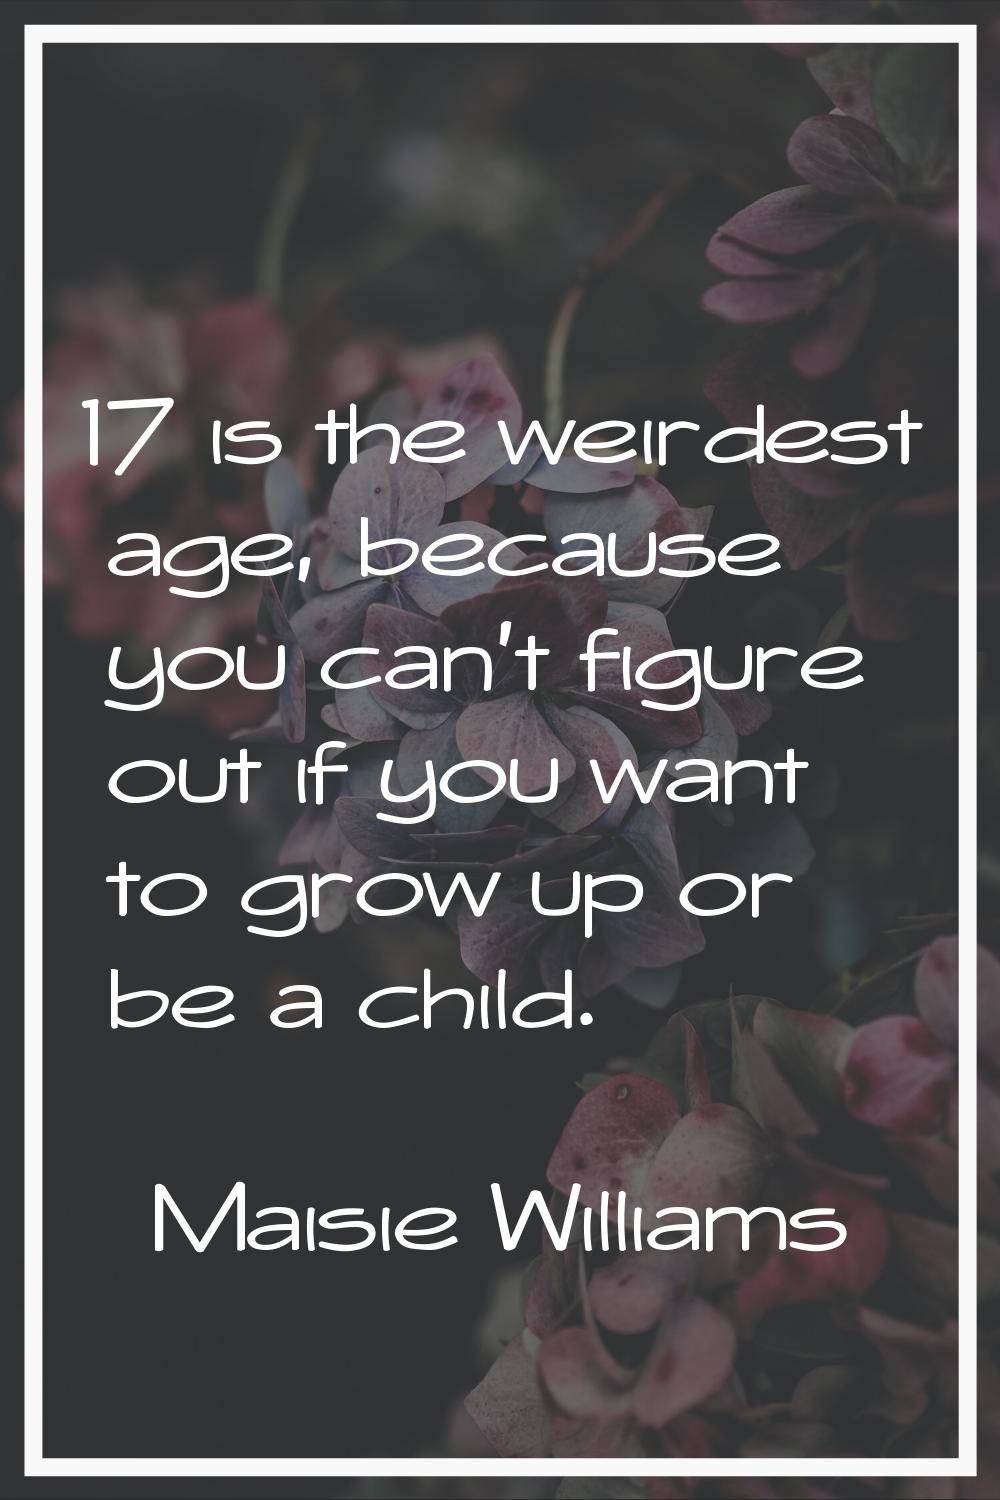 17 is the weirdest age, because you can't figure out if you want to grow up or be a child.